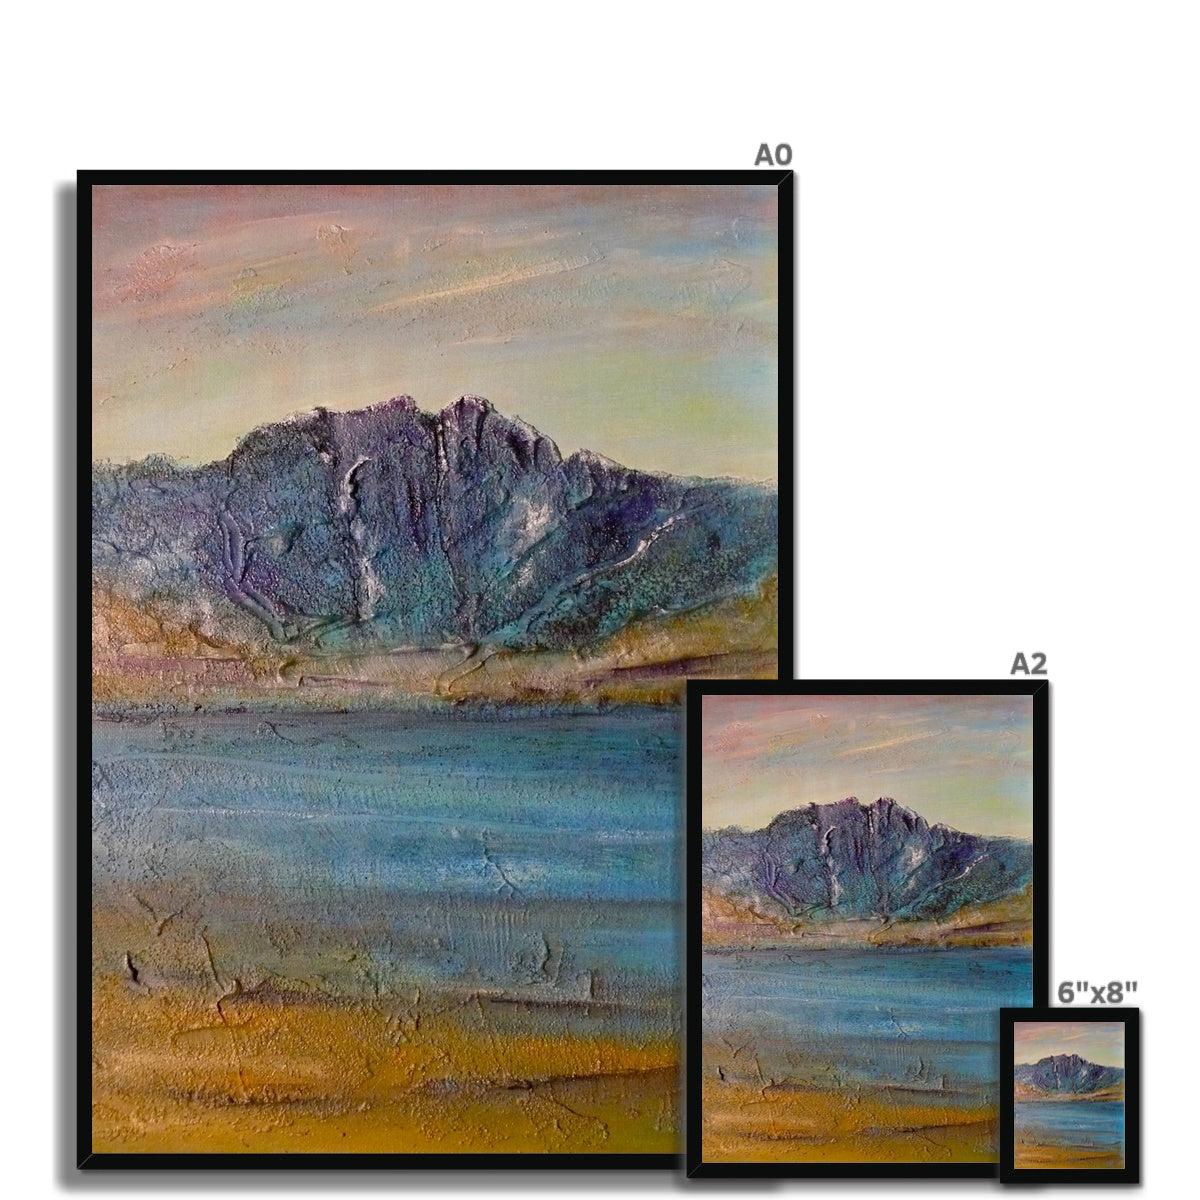 Torridon Painting | Framed Prints From Scotland-Framed Prints-Scottish Lochs & Mountains Art Gallery-Paintings, Prints, Homeware, Art Gifts From Scotland By Scottish Artist Kevin Hunter